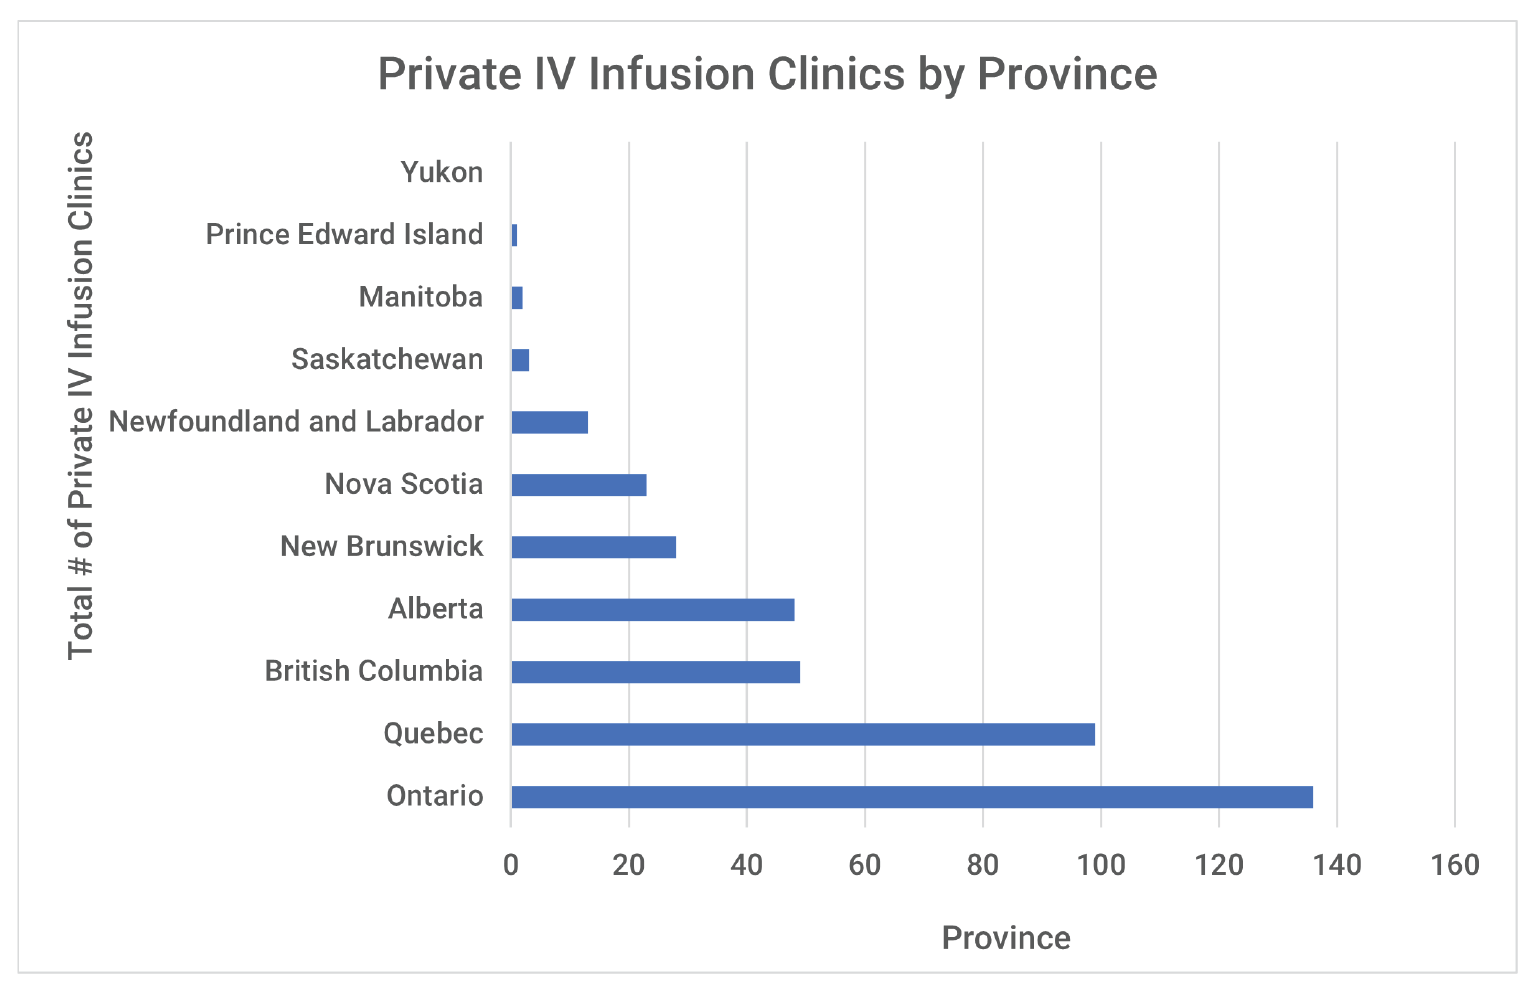 This figure displays the number of IV infusion sites across Canada, categorized by province.